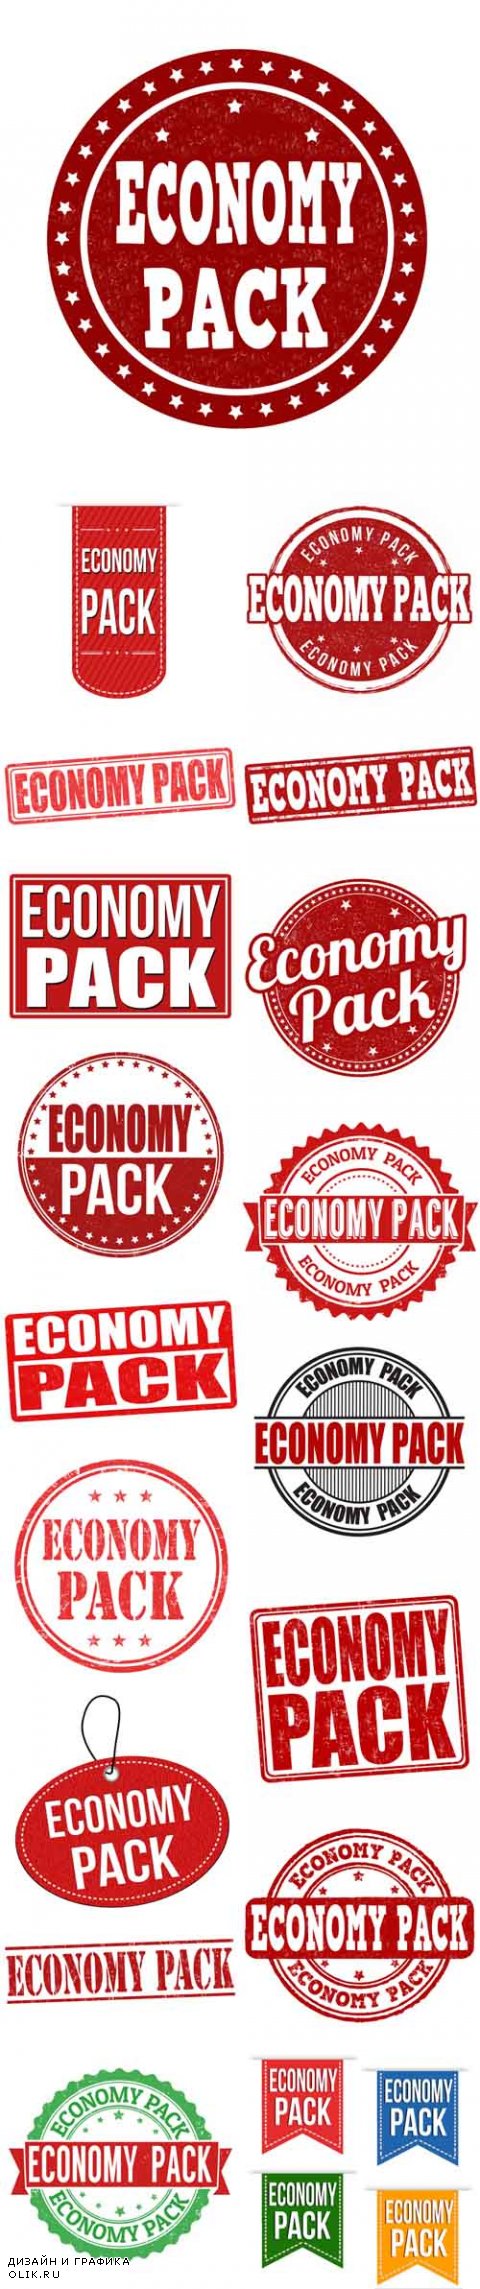 Vector Economy Pack Stamps